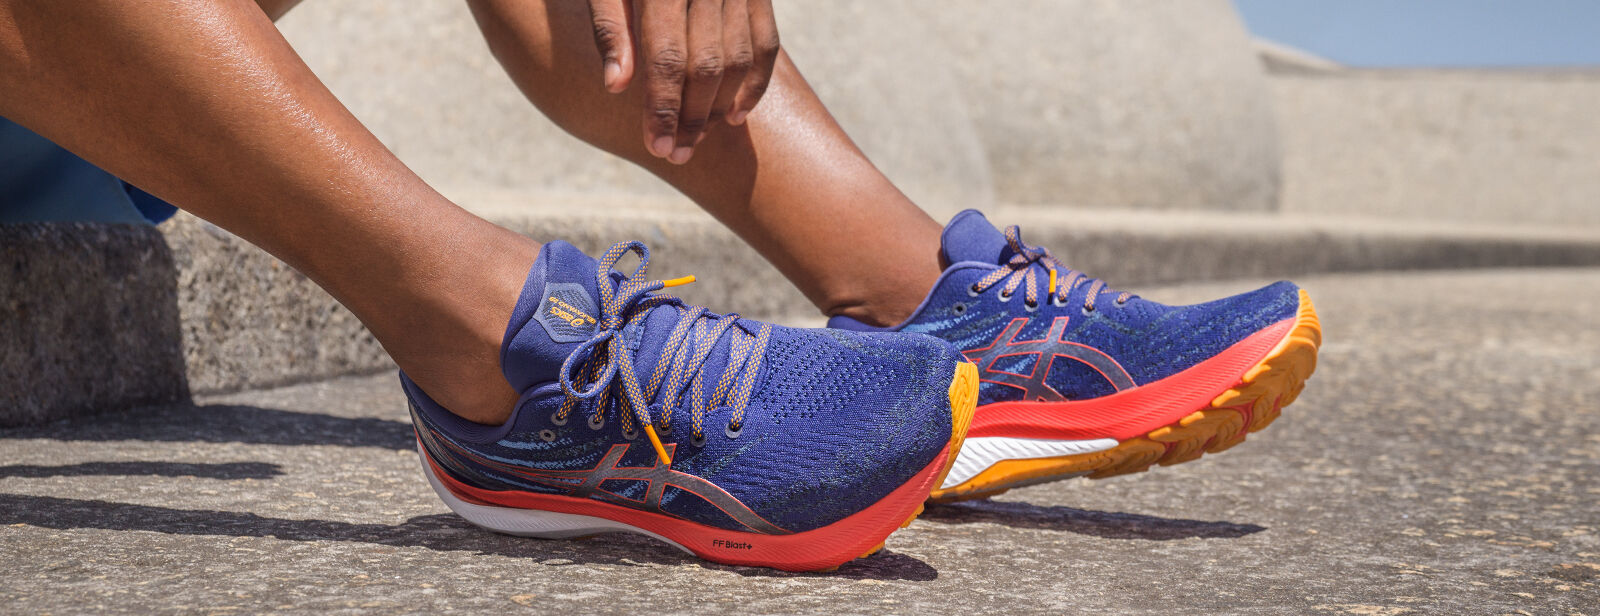 ASICS 5 different methods to improve speed when running